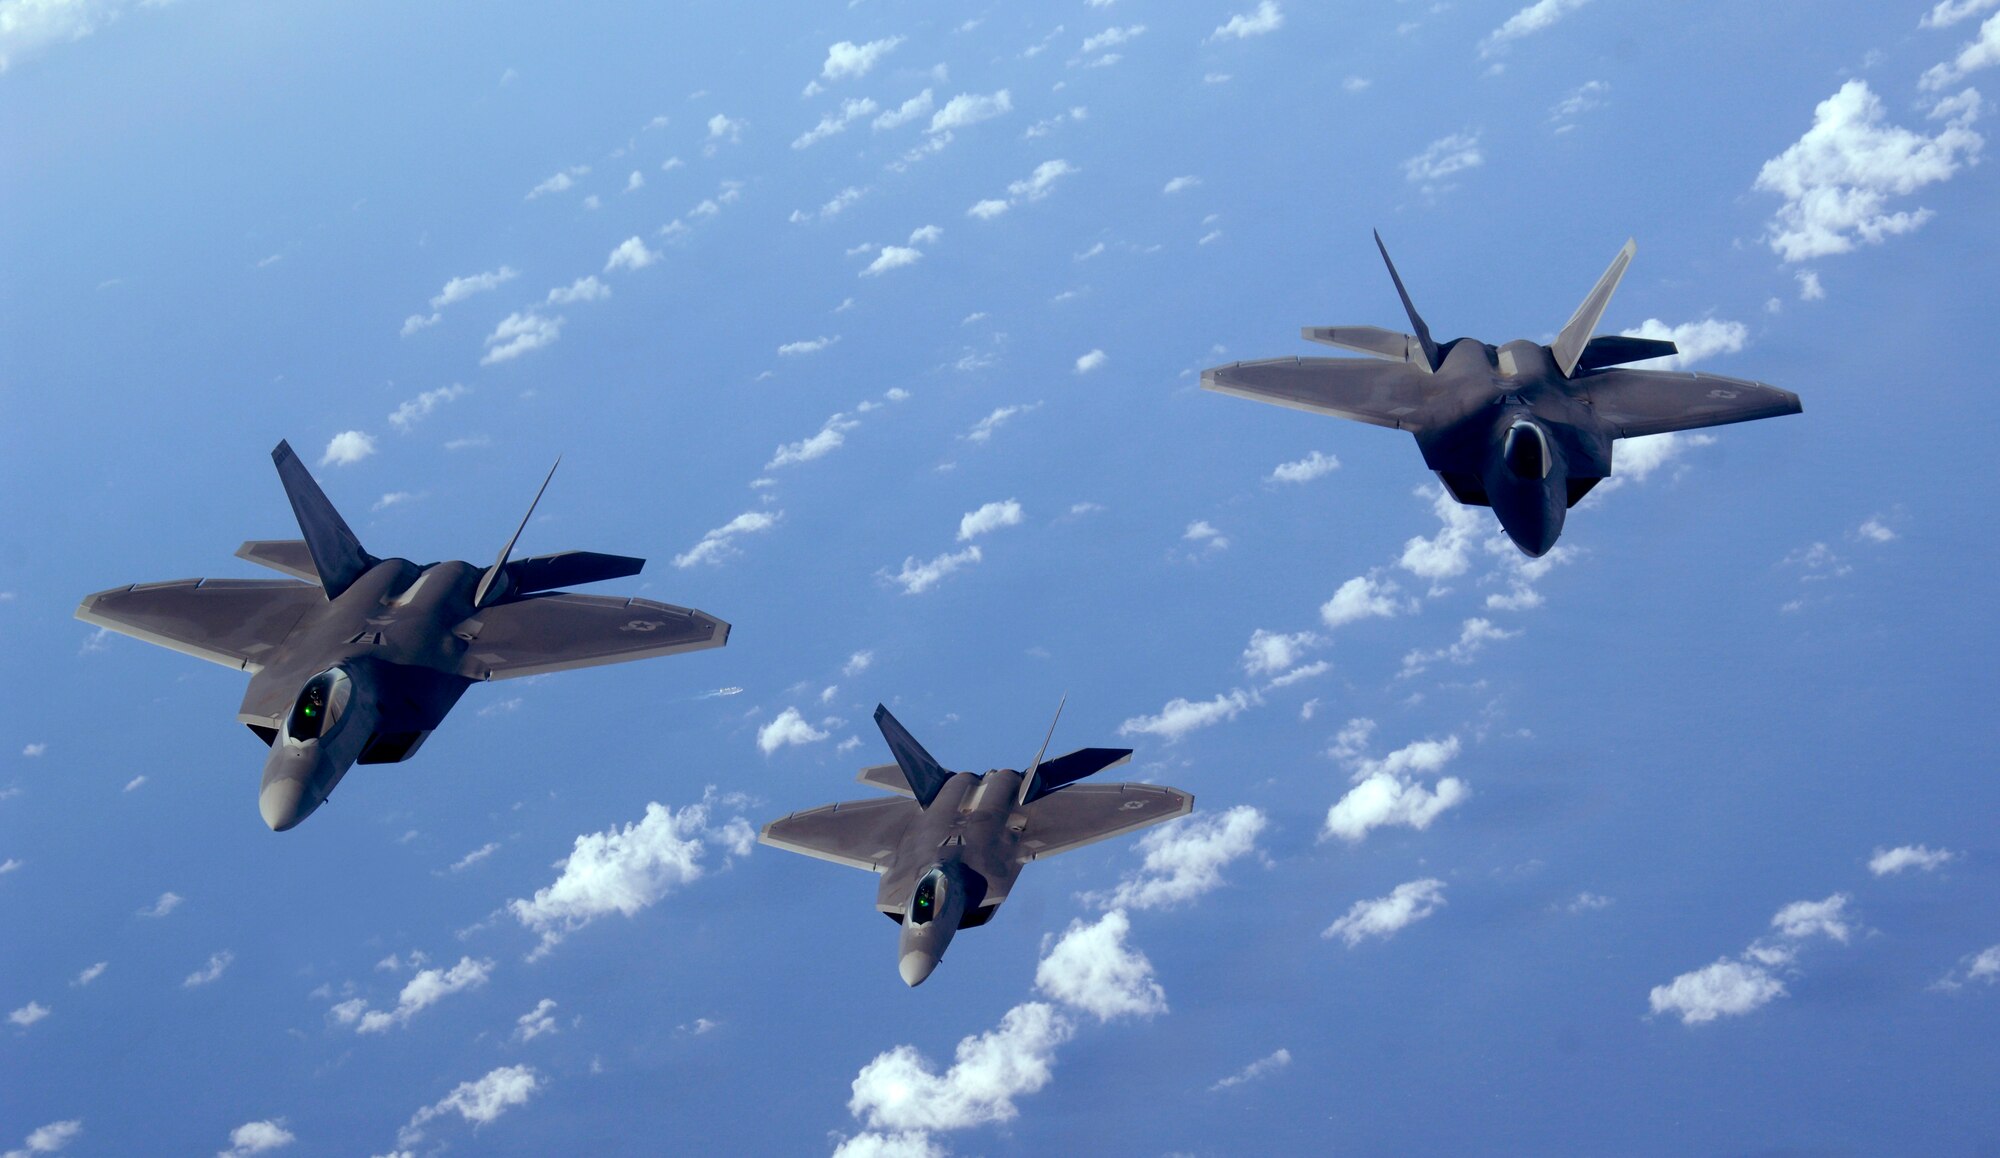 ANDERSEN AIR FORCE BASE, Guam - A three-ship of F-22 Raptors fly over the Pacific Ocean Jan. 28. The Raptors are deployed from Elmendorf AFB, Alaska, to the 90th Expeditionary Fighter Squadron at Andersen AFB, Guam. Andersen received 12 of the $140 million dollar aircraft and more than 250 Airmen have arrived at the base for a three-month deployment as part of the Pacific's Theater Security Package. The stealth-fighters, along with associated maintenance and support personnel will participate in various exercises that provide routine training in an environment different from their home station.  (U.S. Air Force photo Master Sgt. Kevin J. Gruenwald) 






















  












 











































  












 

























